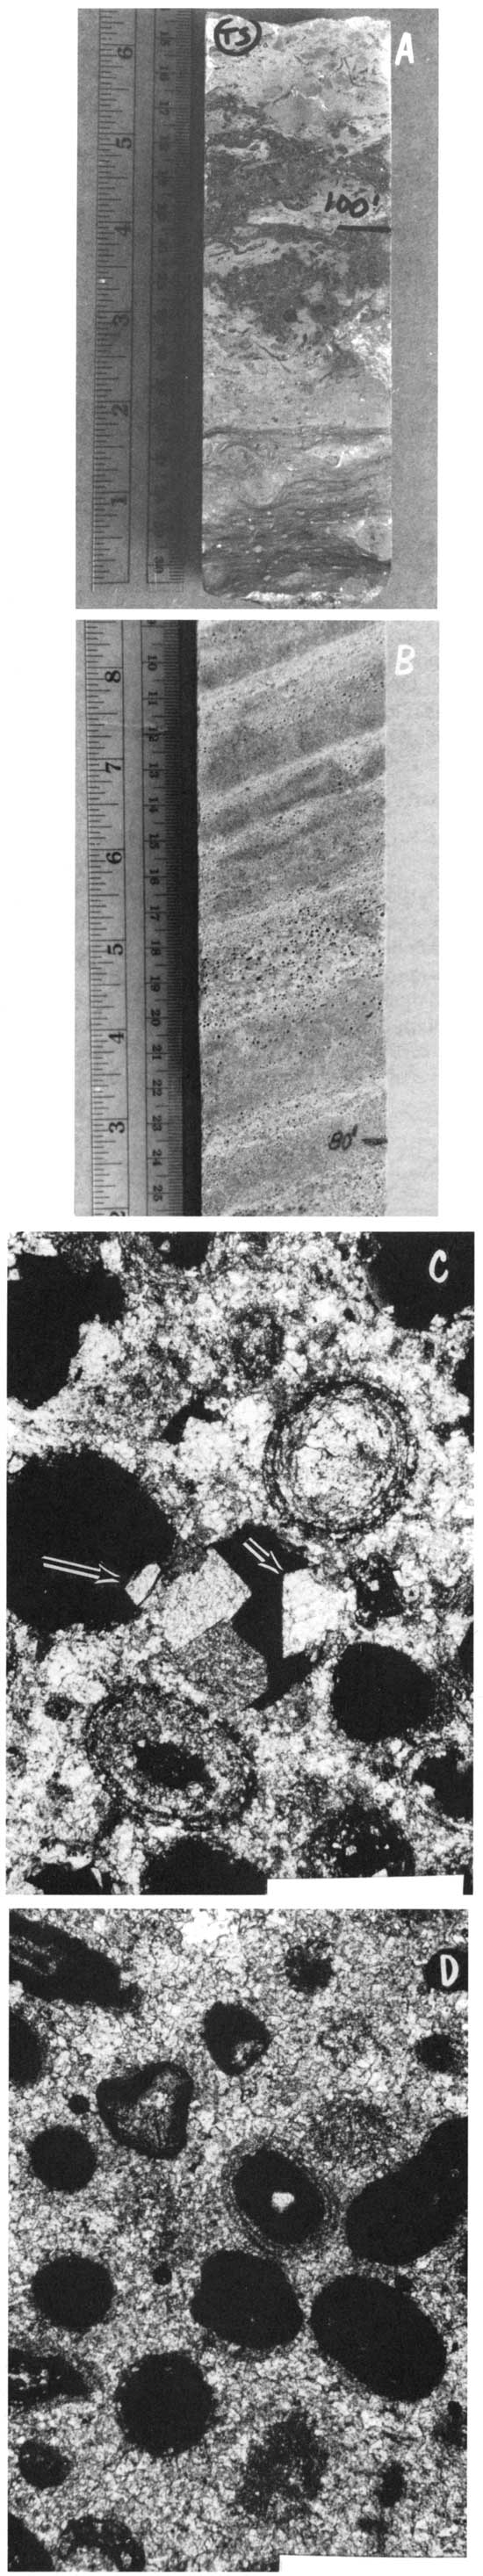 Four black and white photos; top two are core slabs and bottom two are thin sections.